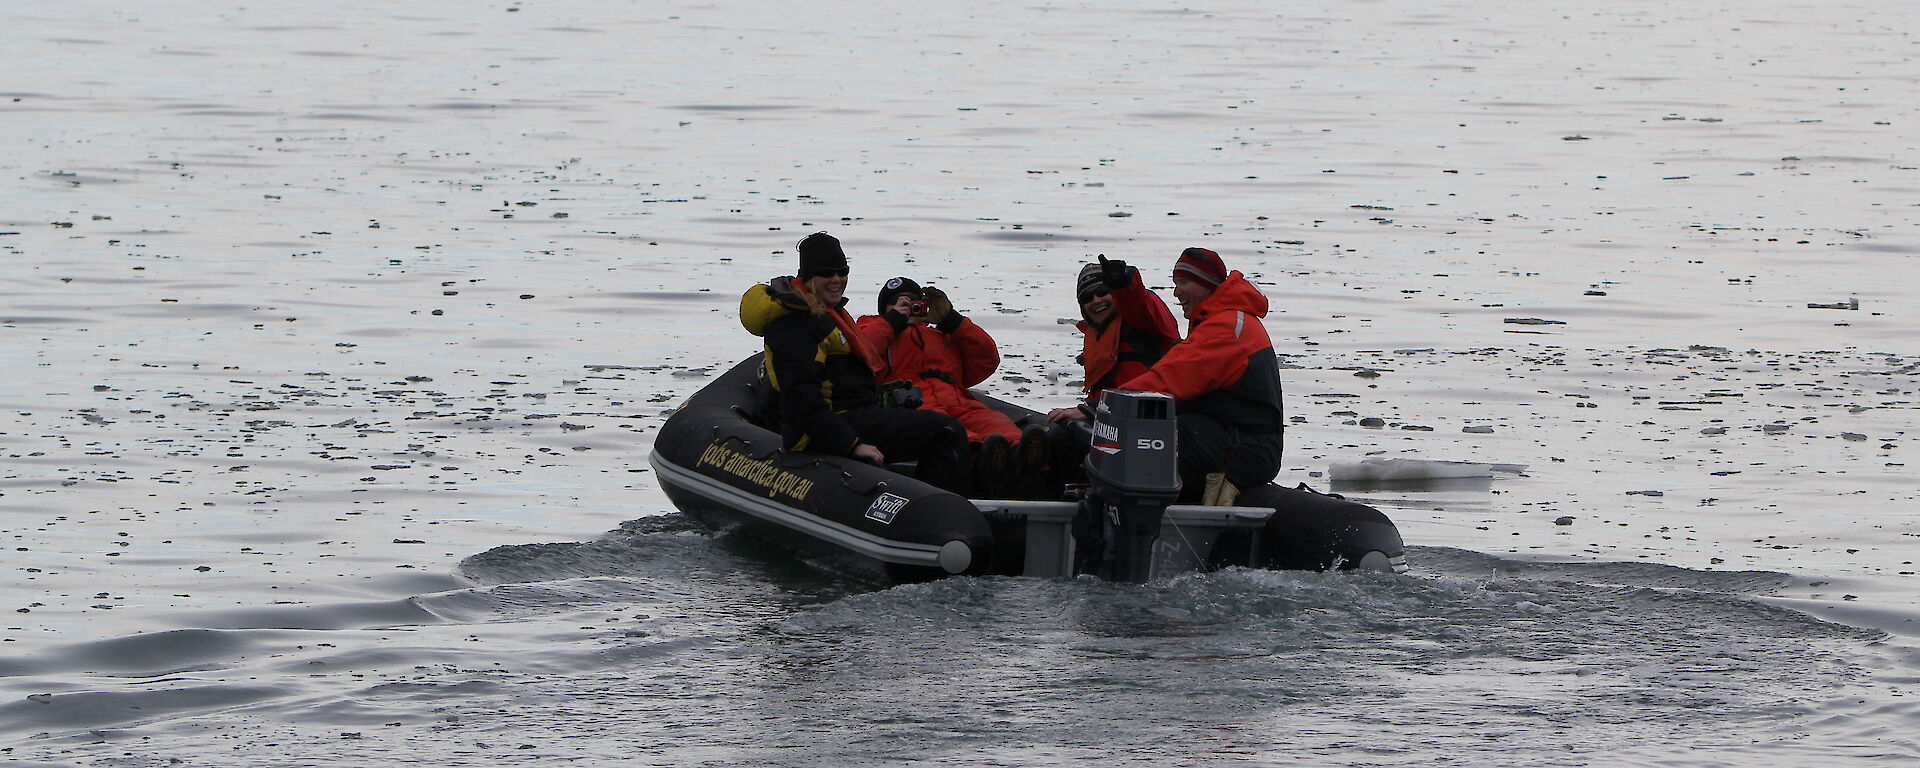 The beginning of sea ice formation at Davis 2016 — grease ice and brash ice in the bay in front oft the station on the 8th of March. An IRB in the water travelling out to the Chinese ship with passengers Jenn McGhee and Sharon Labudda.